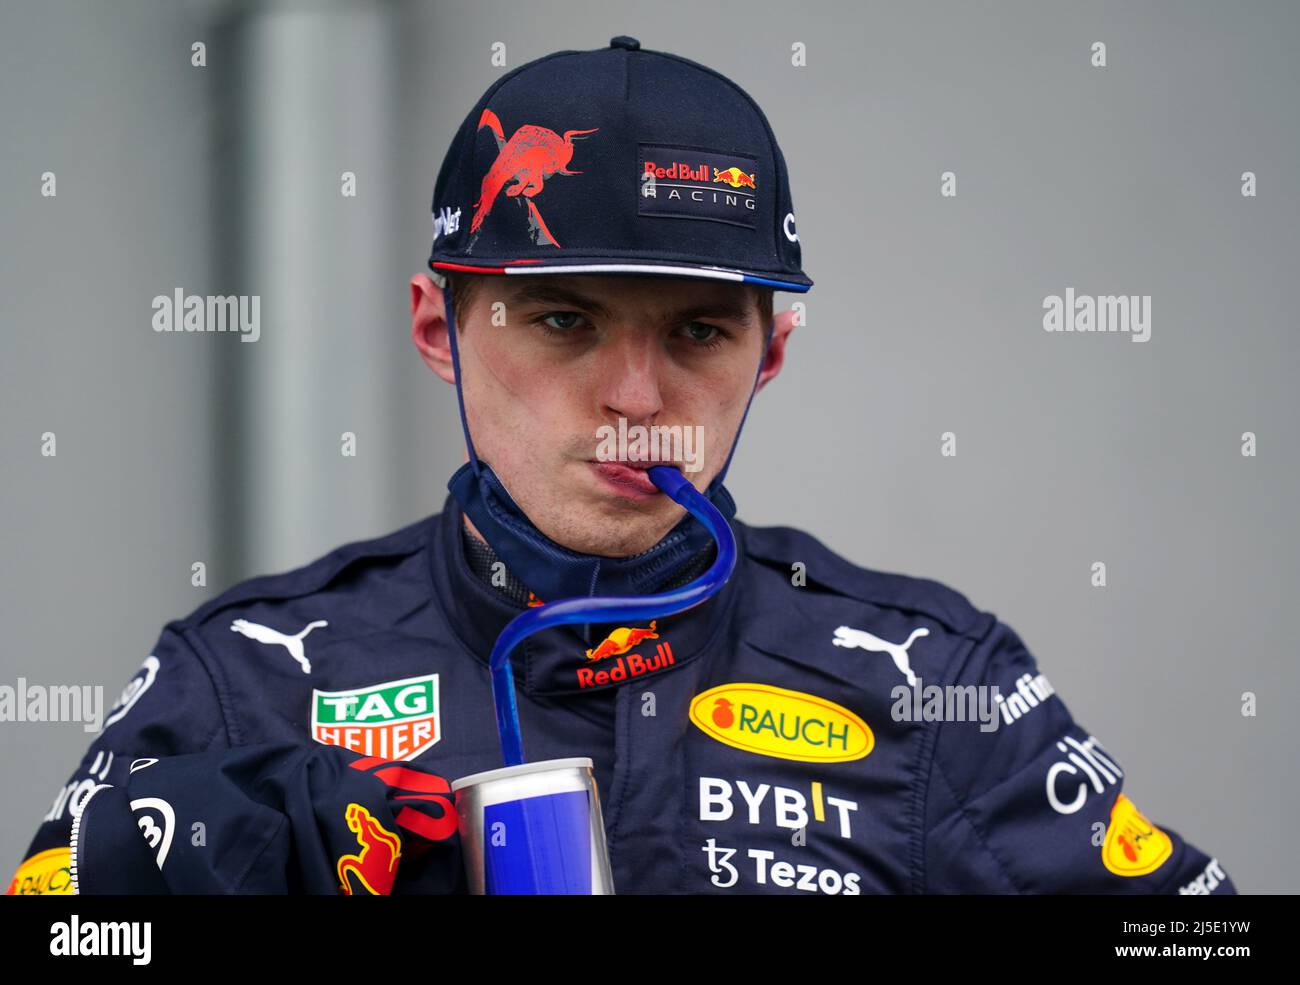 Red Bull Racing's Max Verstappen in parc ferme after Qualifying for the Emilia Romagna Grand Prix at the Autodromo Internazionale Enzo e Dino Ferrari circuit in Italy, better known as Imola. Picture date: Friday April 22, 2022. Stock Photo